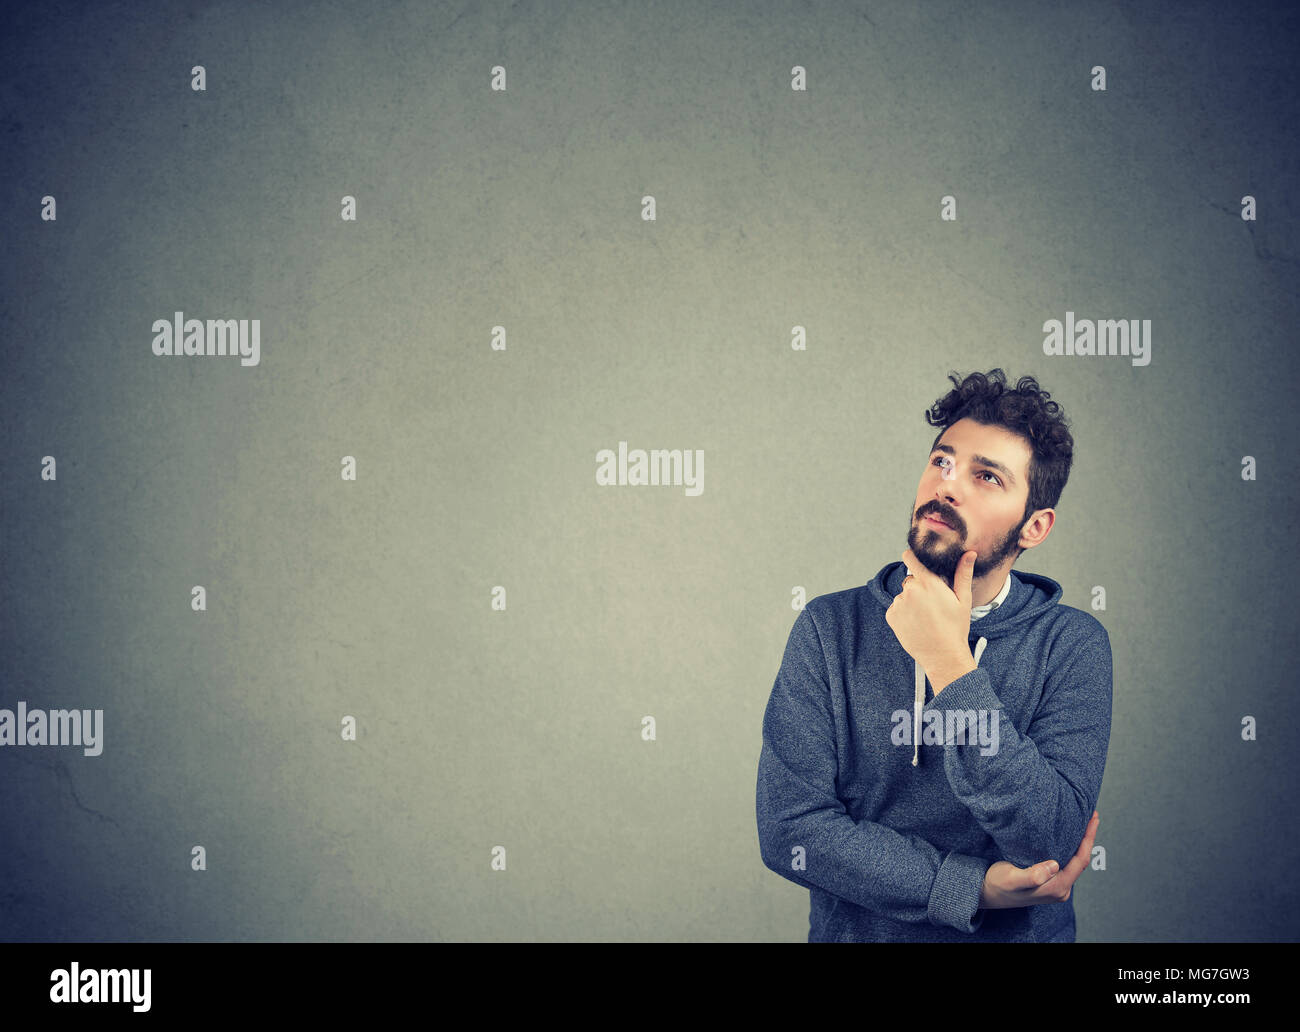 Portrait of a serious man thinking looking up isolated on wall background with copy space. Human emotions, perception Stock Photo